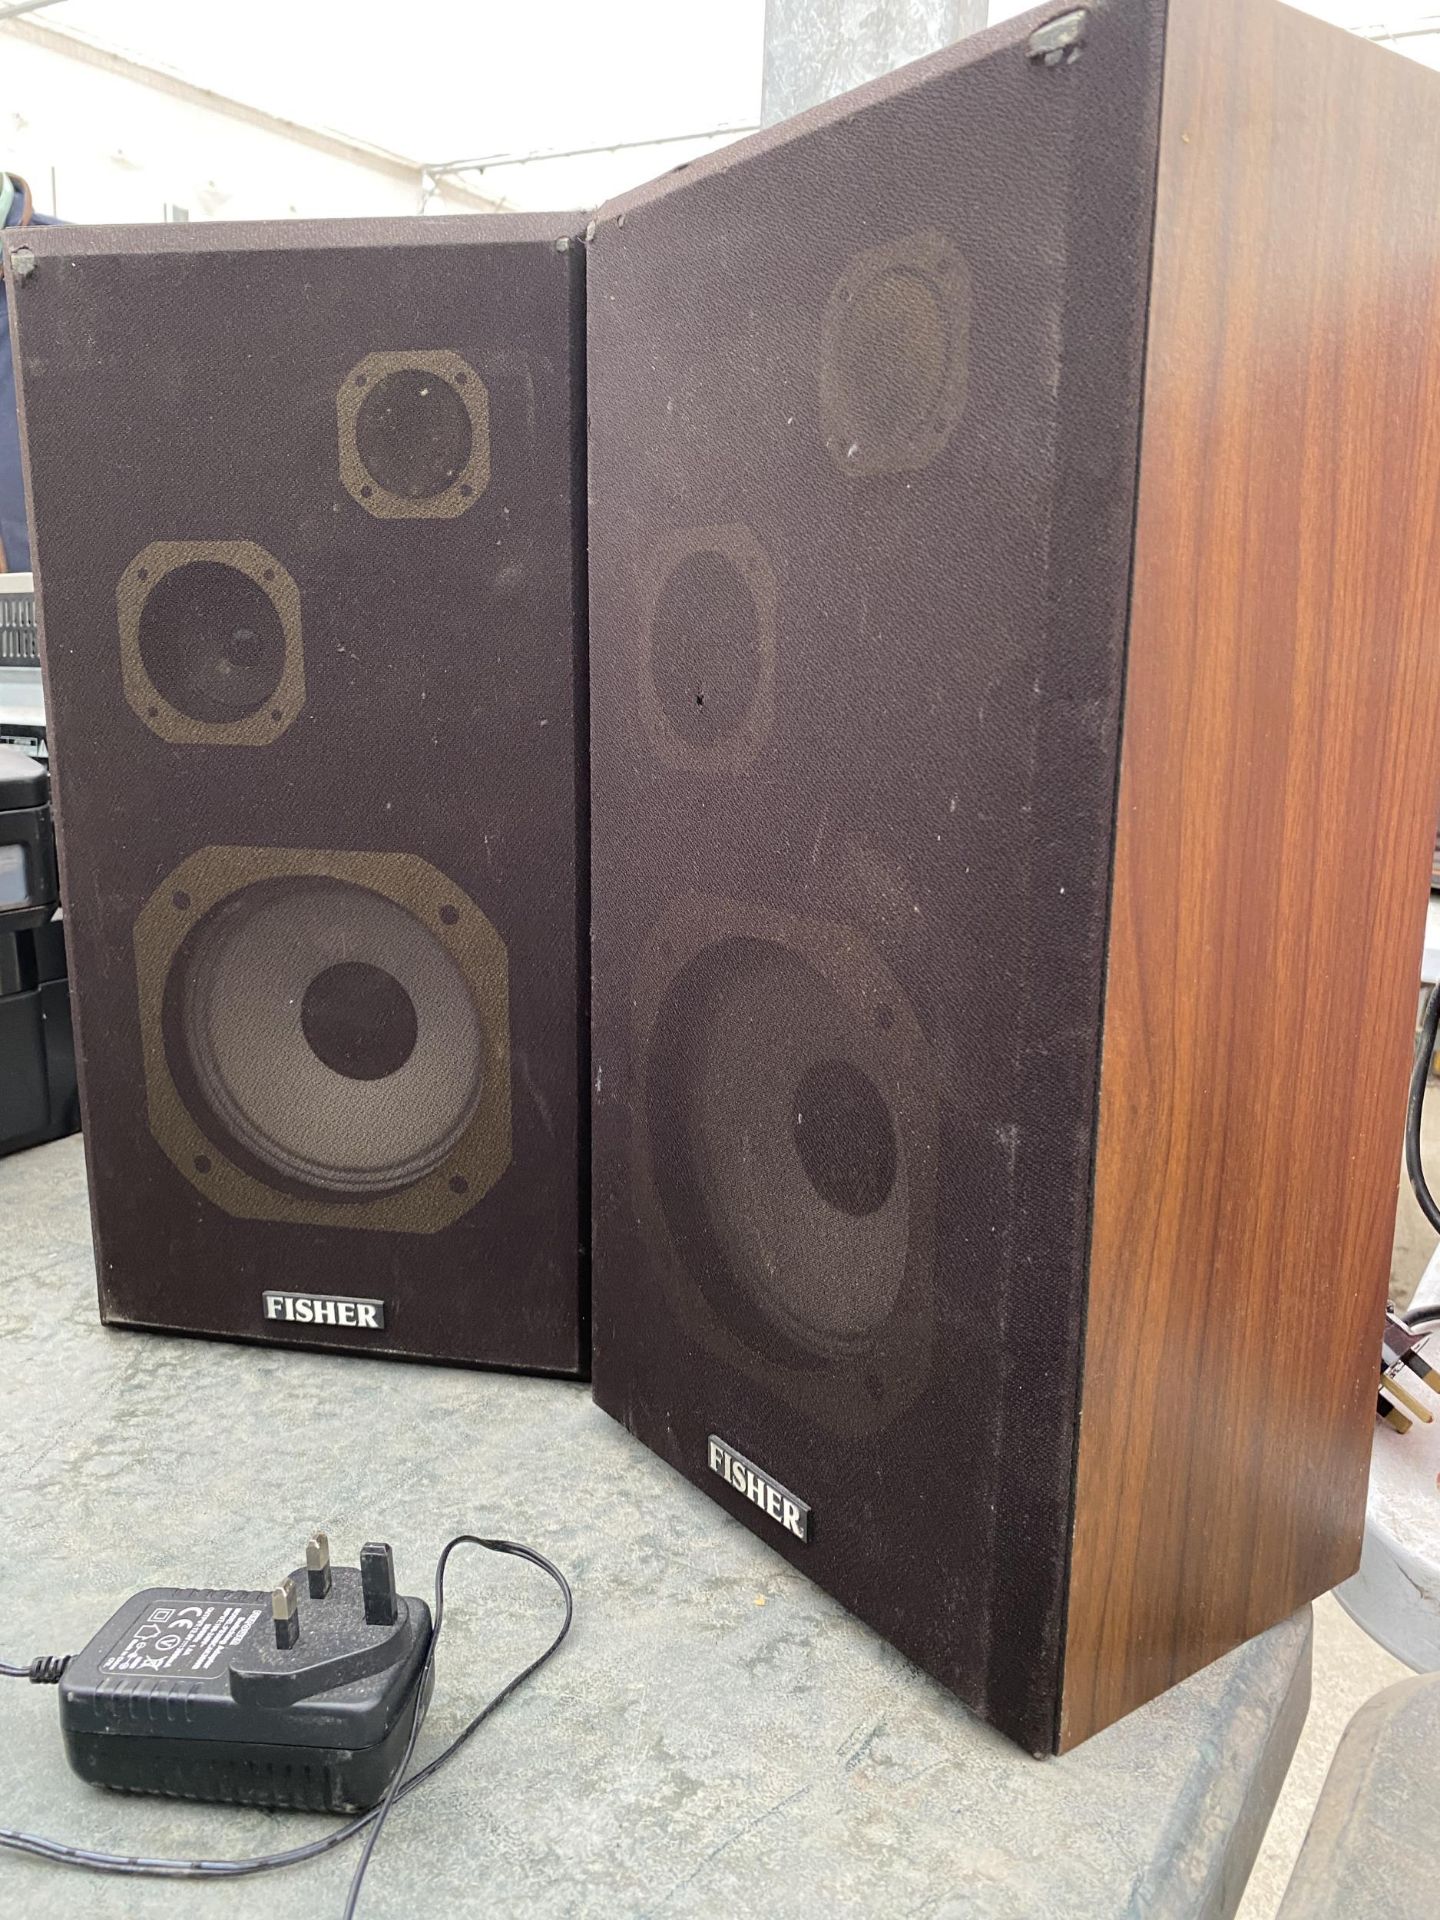 A LOGIK 22" TELEVISION, A PAIR OF WOODEN CASED FISHER SPEAKERS AND A CHINON 6000 AUTO SLIDE - Image 2 of 3